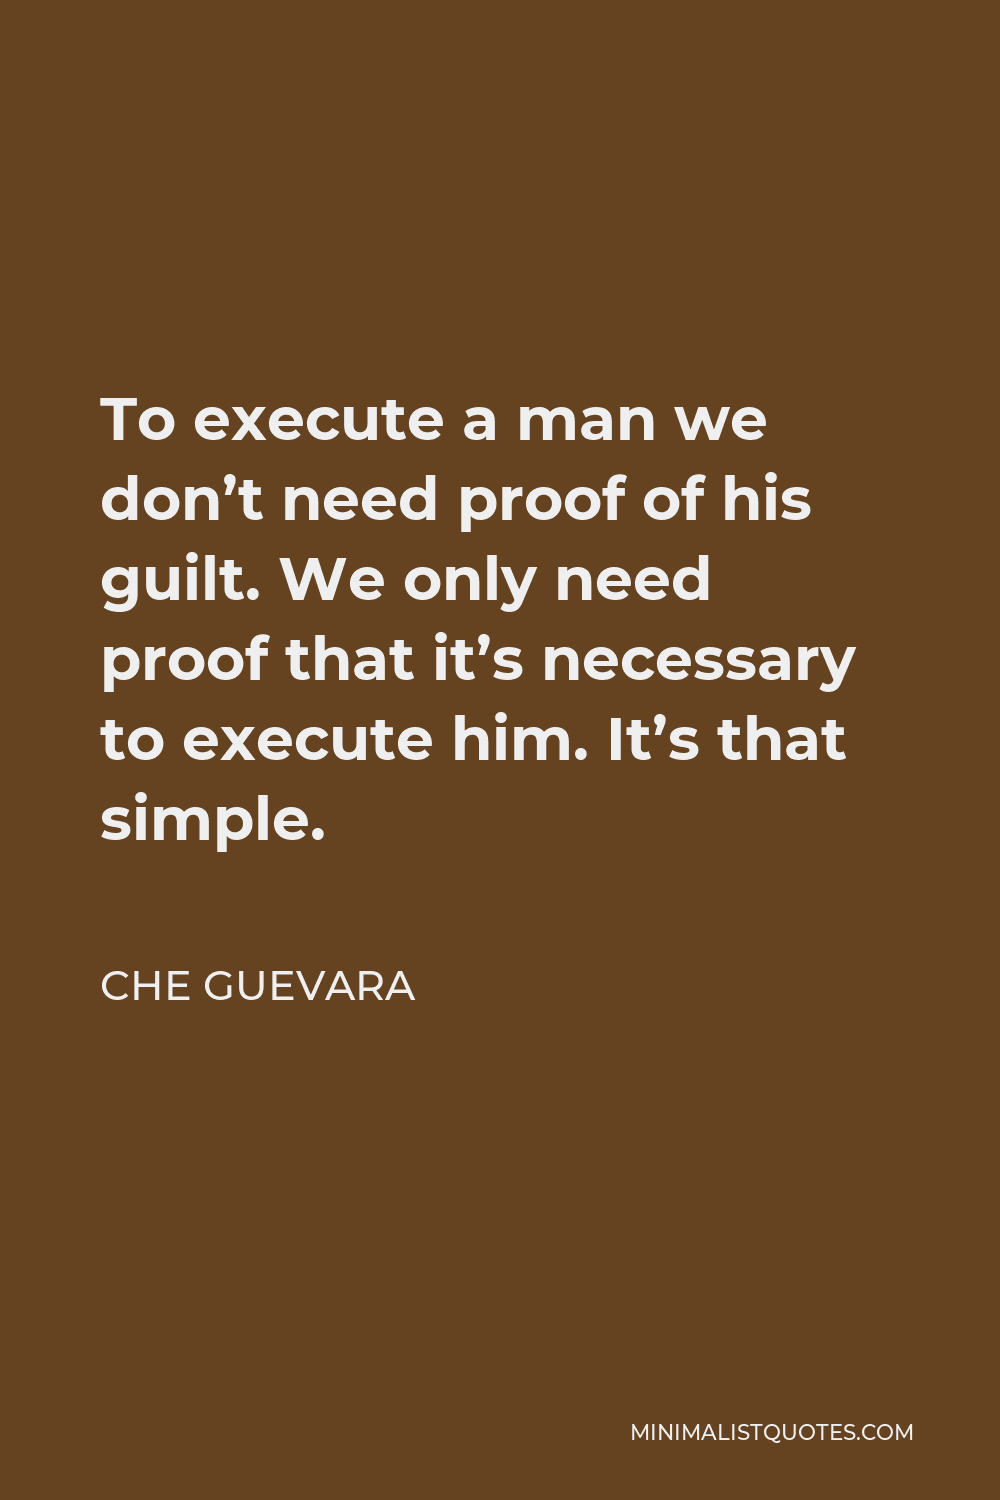 Che Guevara Quote - To execute a man we don’t need proof of his guilt. We only need proof that it’s necessary to execute him. It’s that simple.